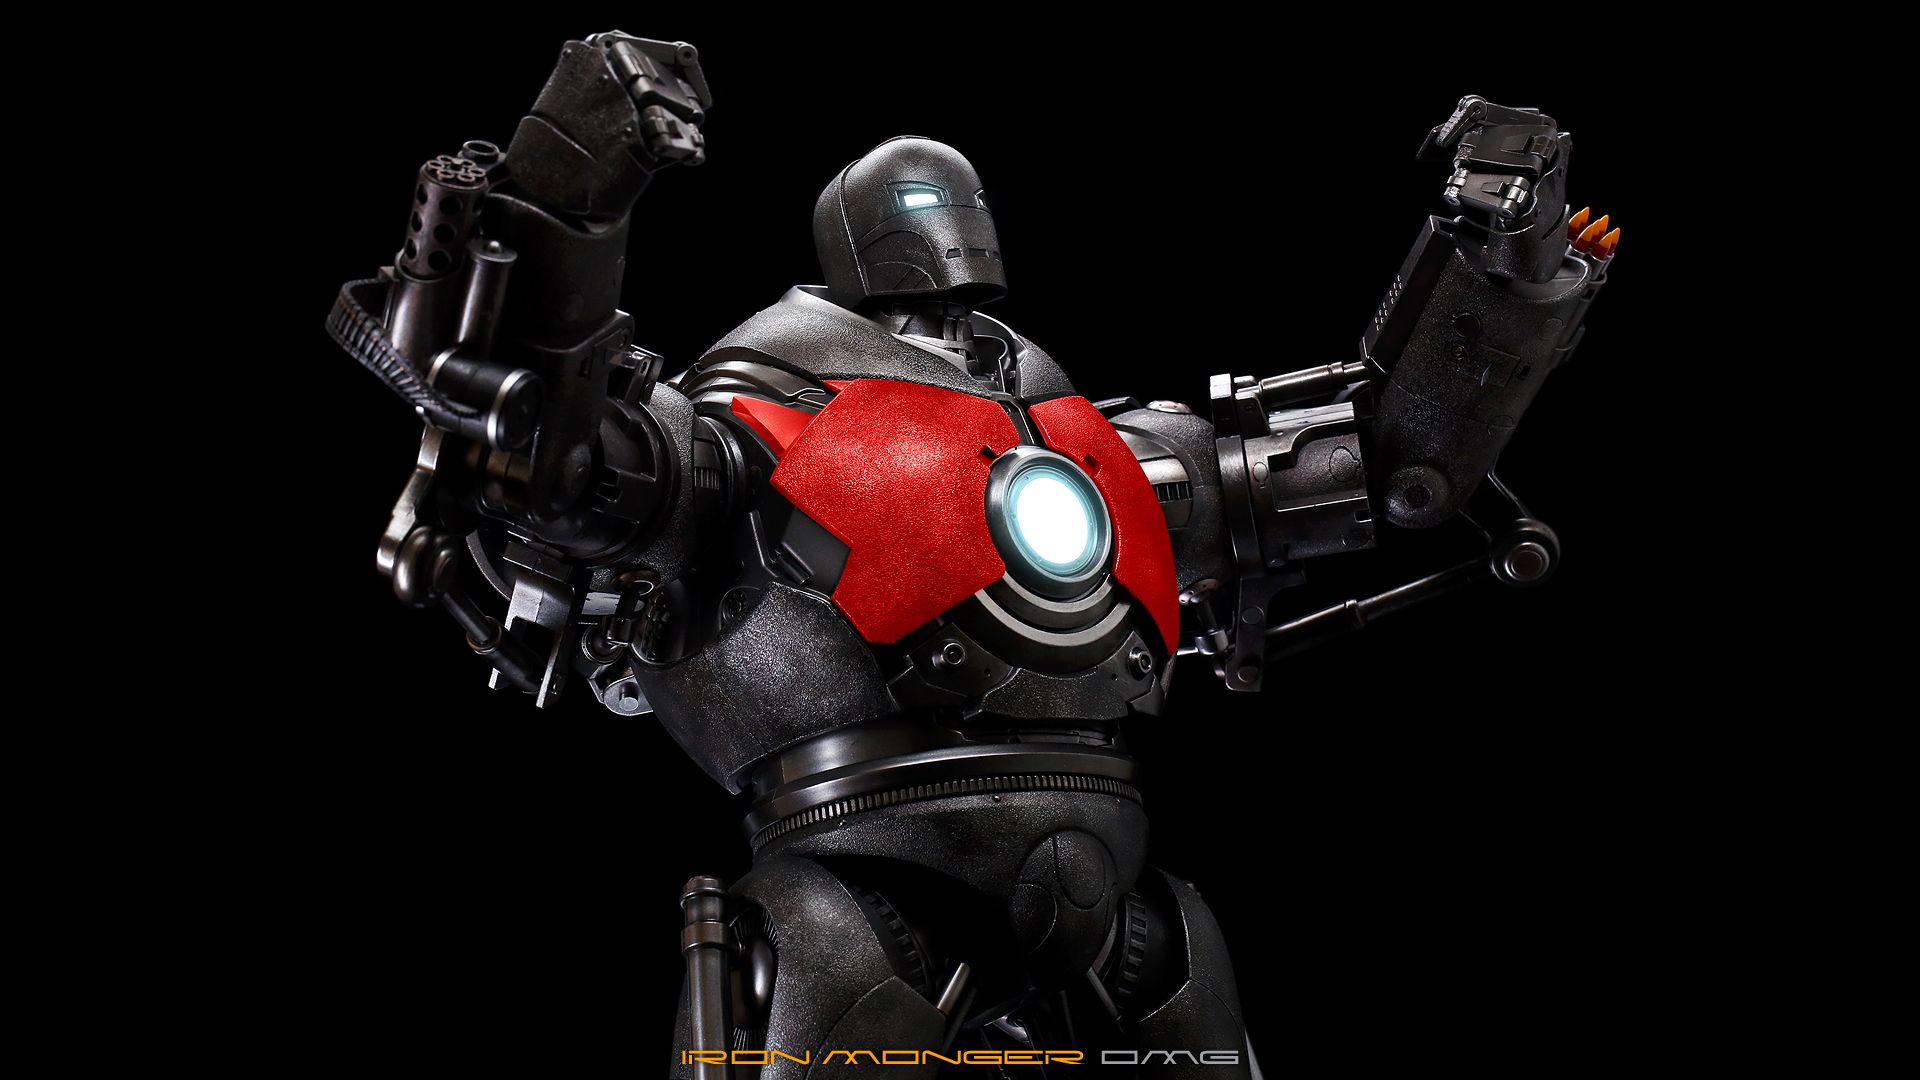 [Hot Toys] Iron Man: Iron Monger 1/6th scale - Limited Edition Collectible Figurine - Página 9 IronMongerHD300_zps00300570